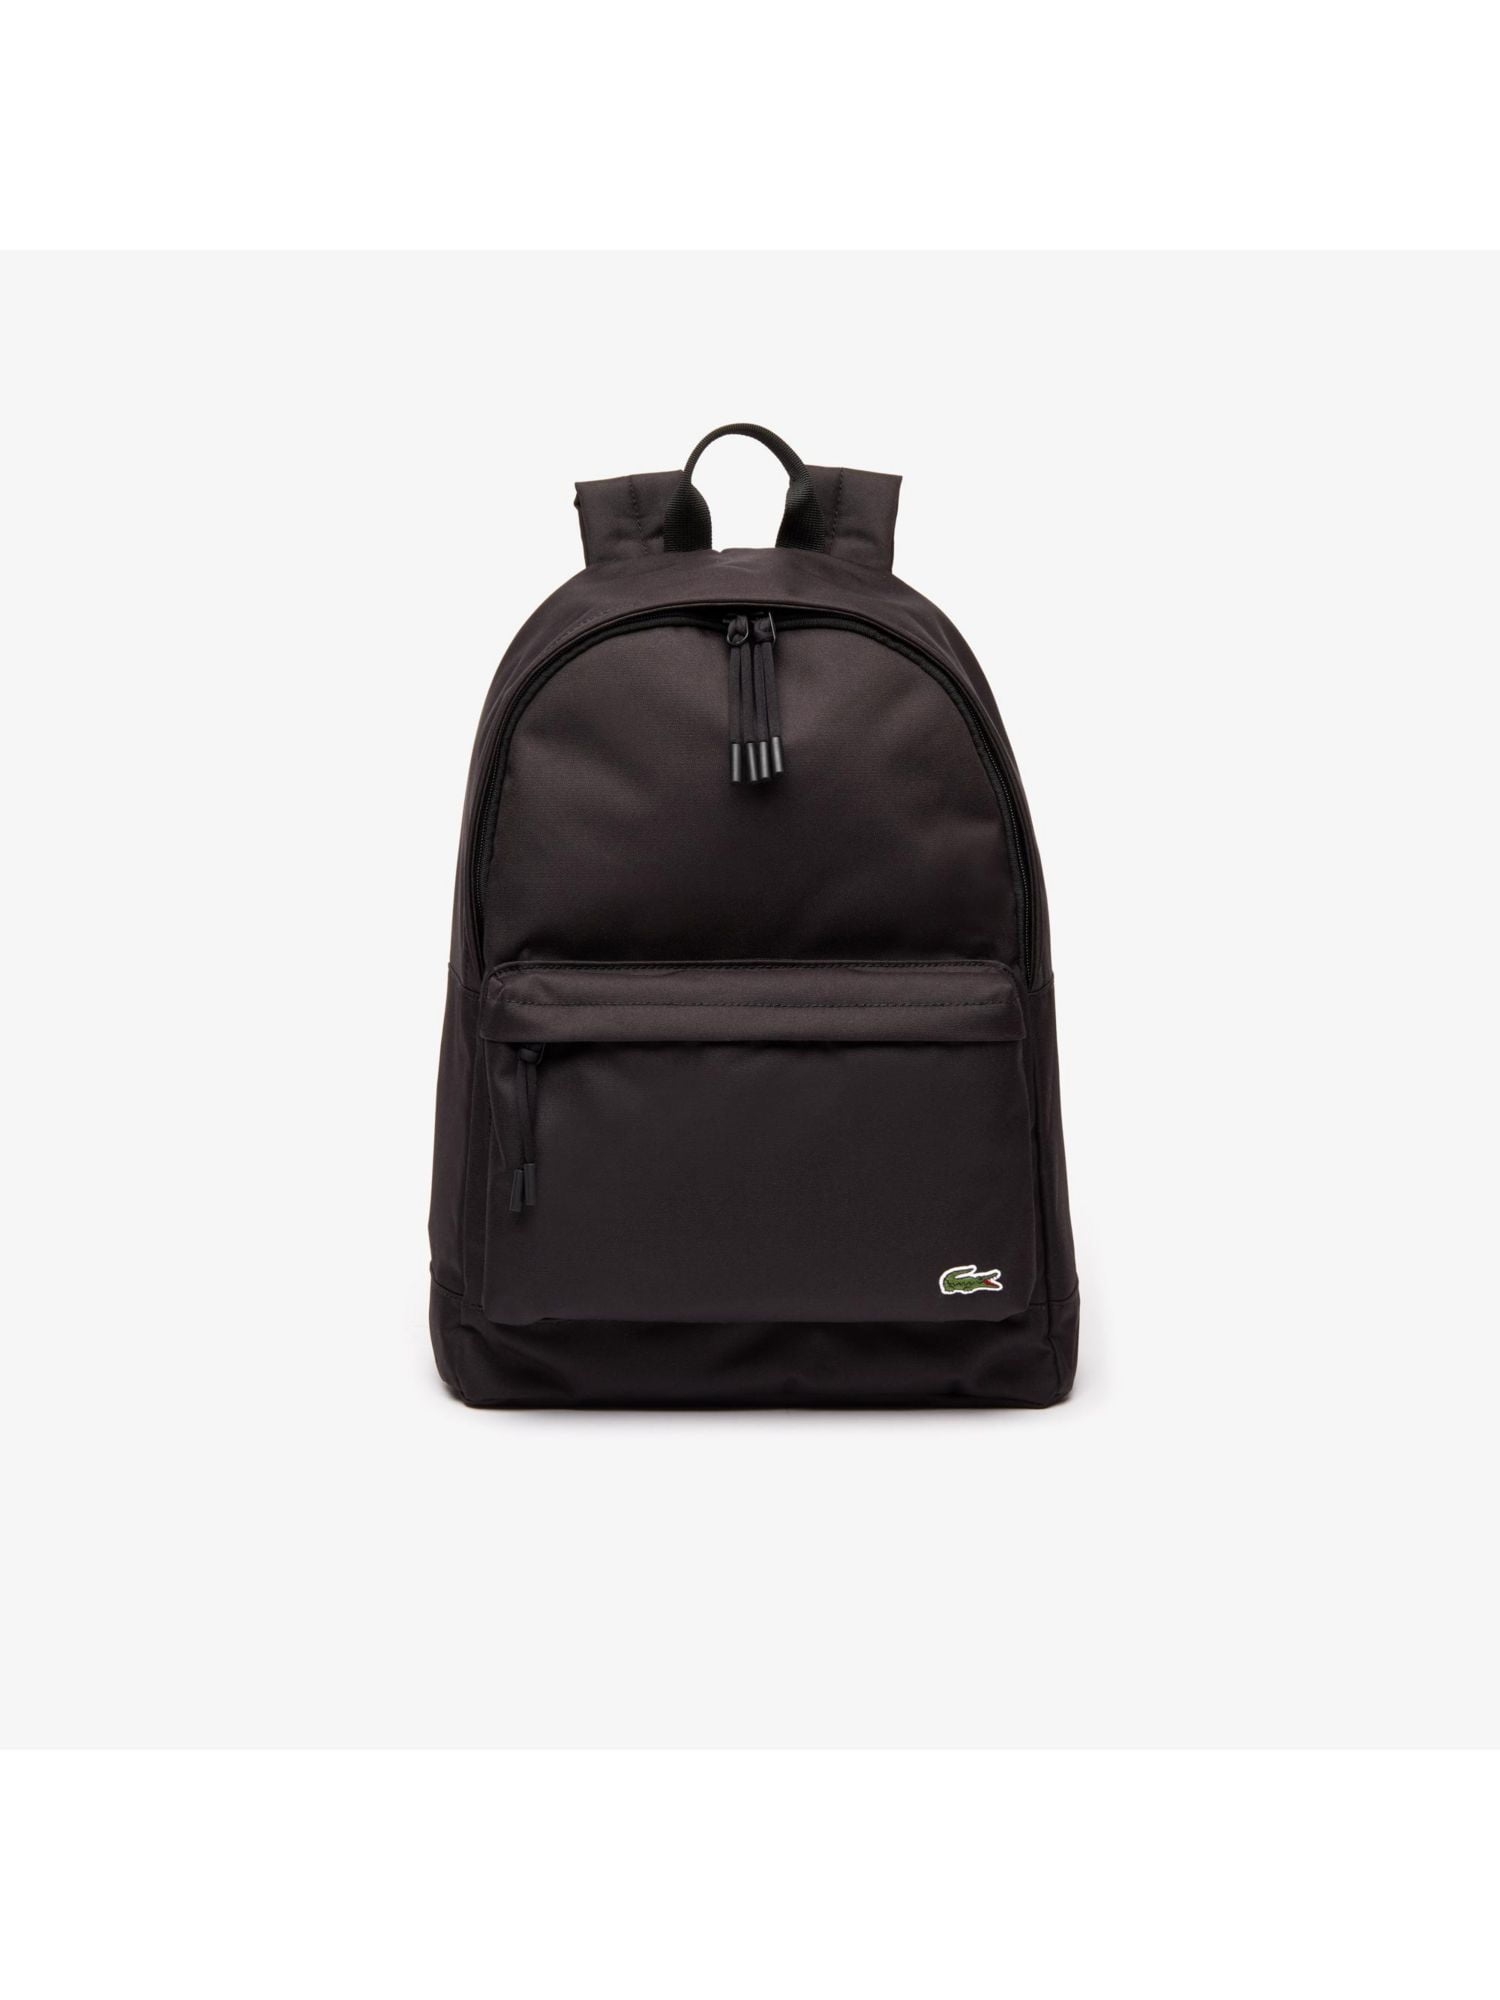 LACOSTE Men's Back Mesh Padding Top Handle Solid Embroidered Double Flat Strap Backpack - Walmart.com